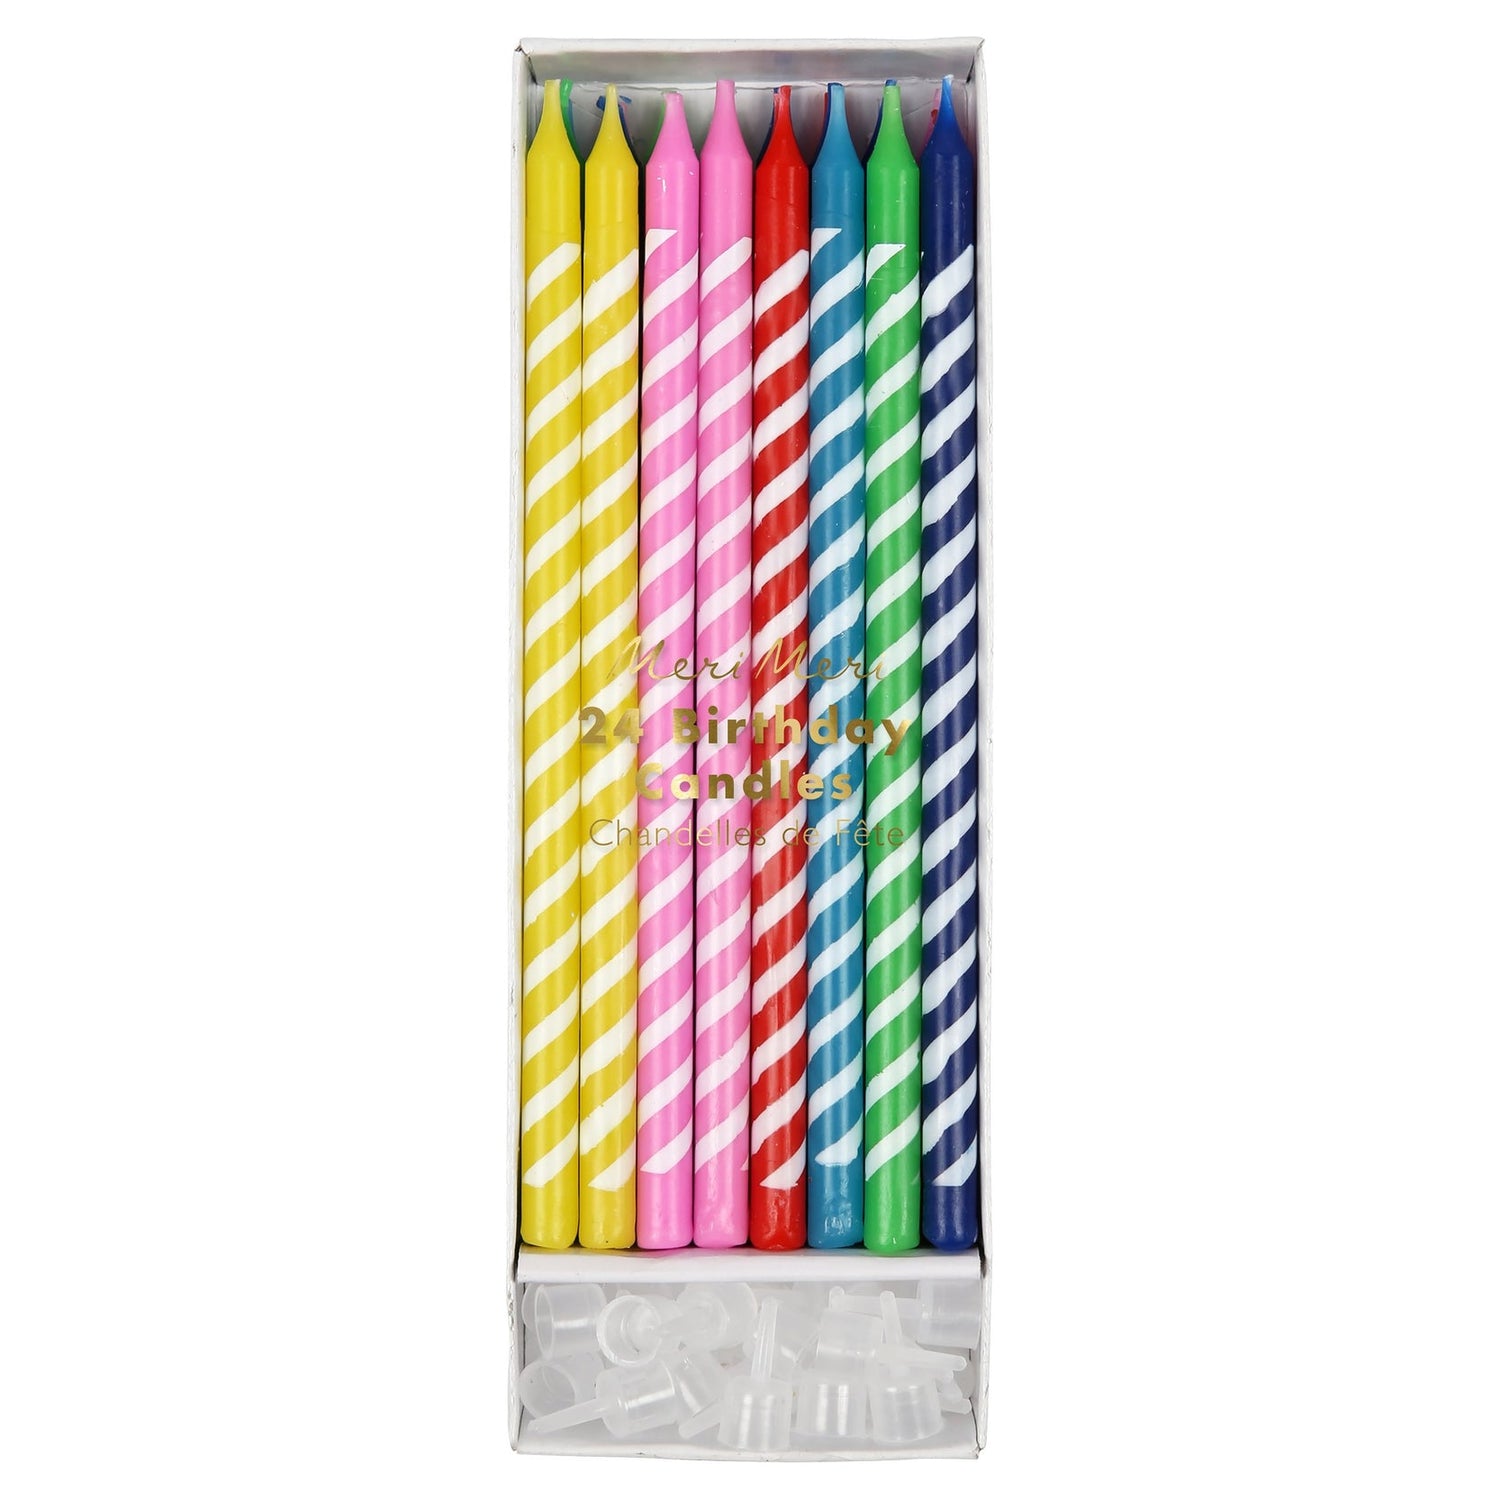 A set of Meri Meri Bright Party Candles in a box, perfect for any celebration.